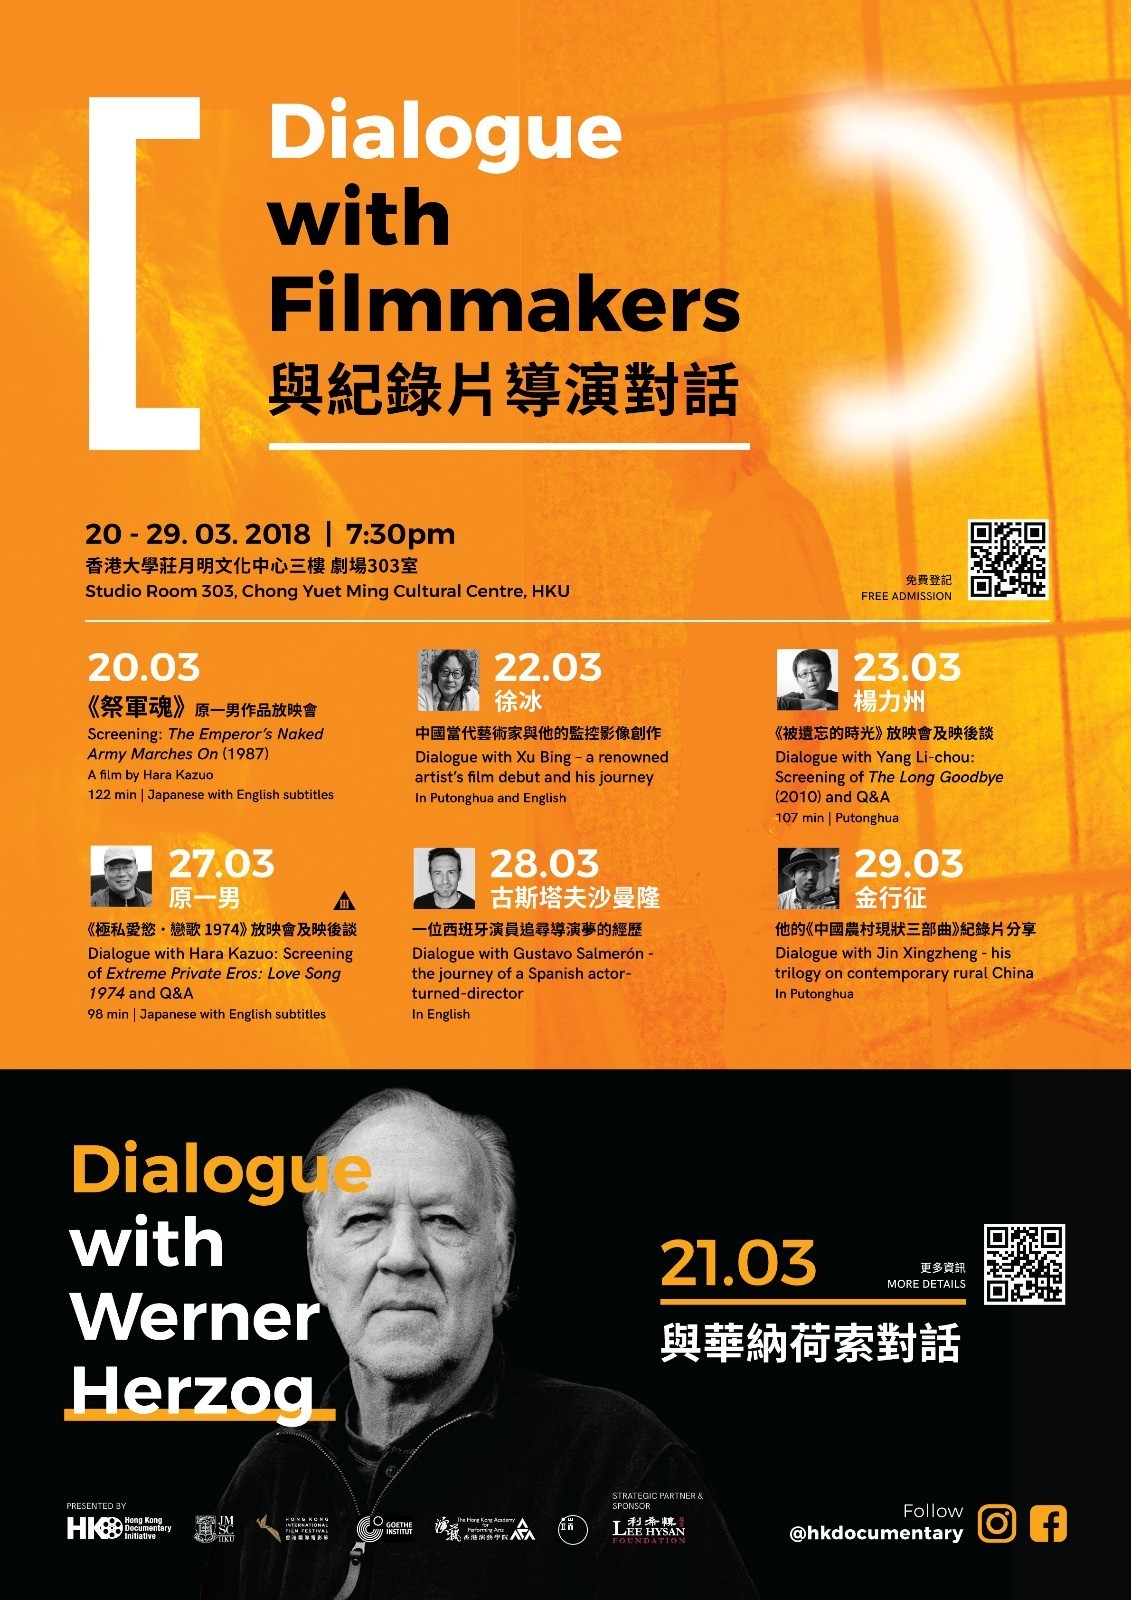  Dialogue with Filmmakers 